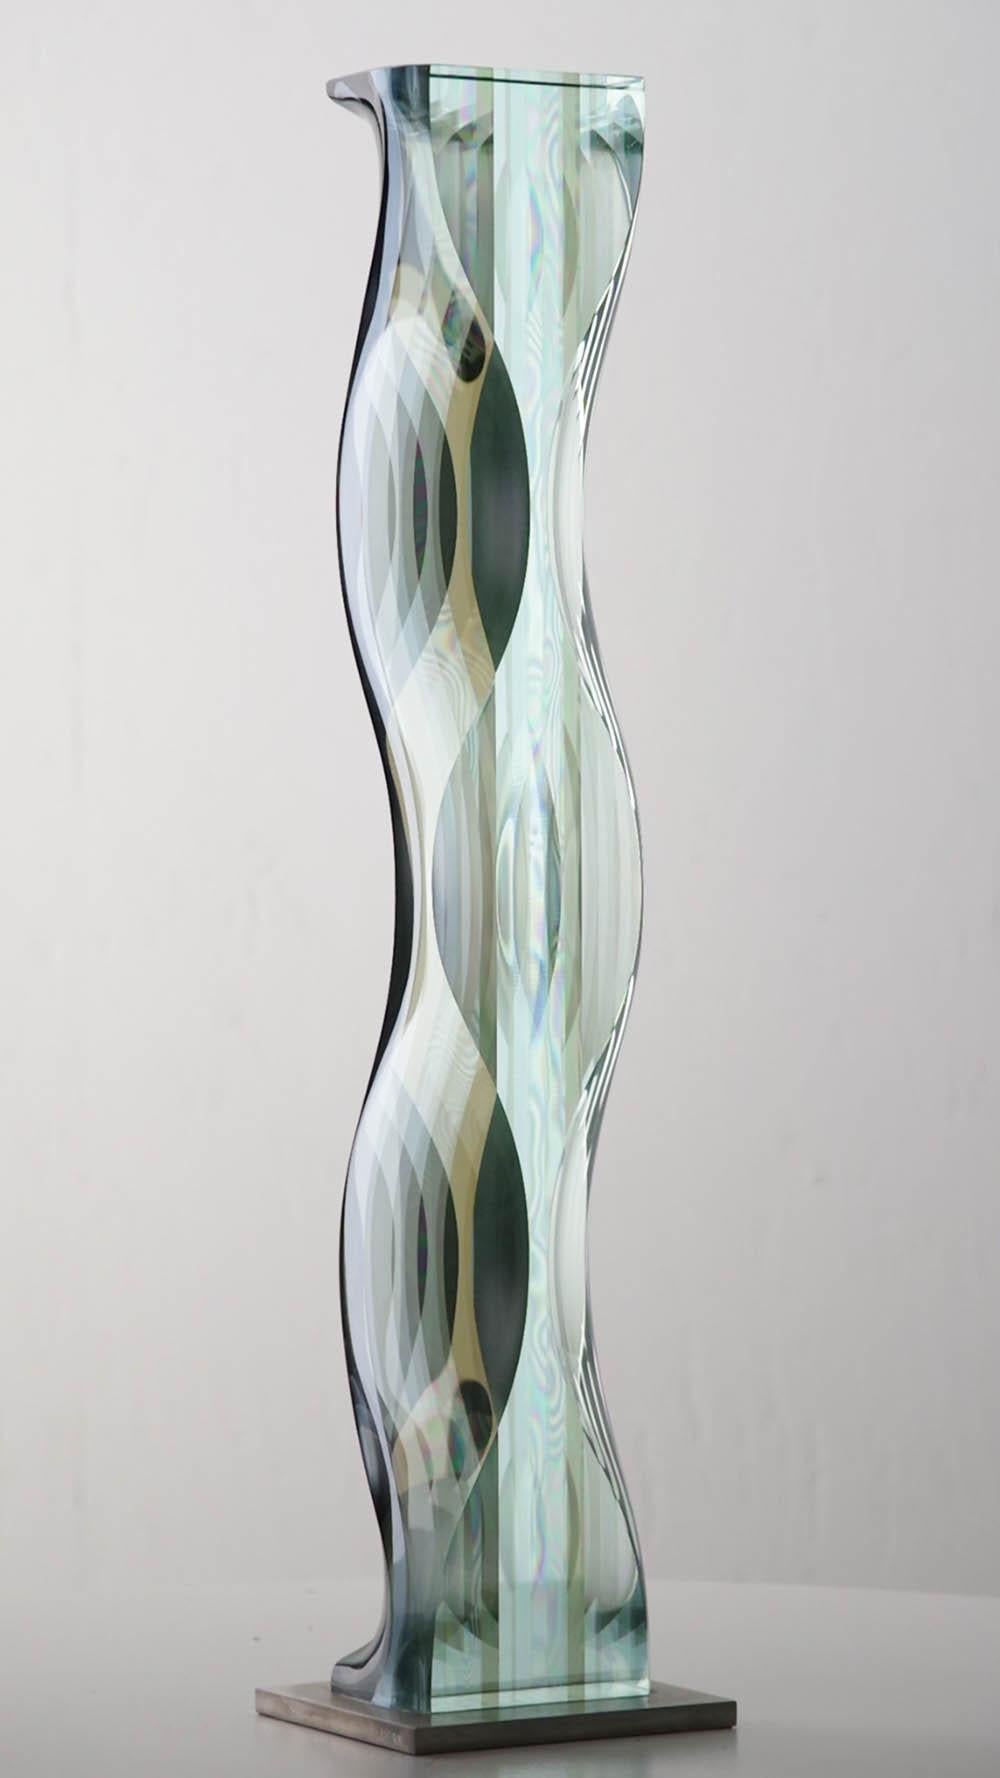 M.180603 by Toshio Iezumi - Contemporary glass sculpture, green, abstract For Sale 2